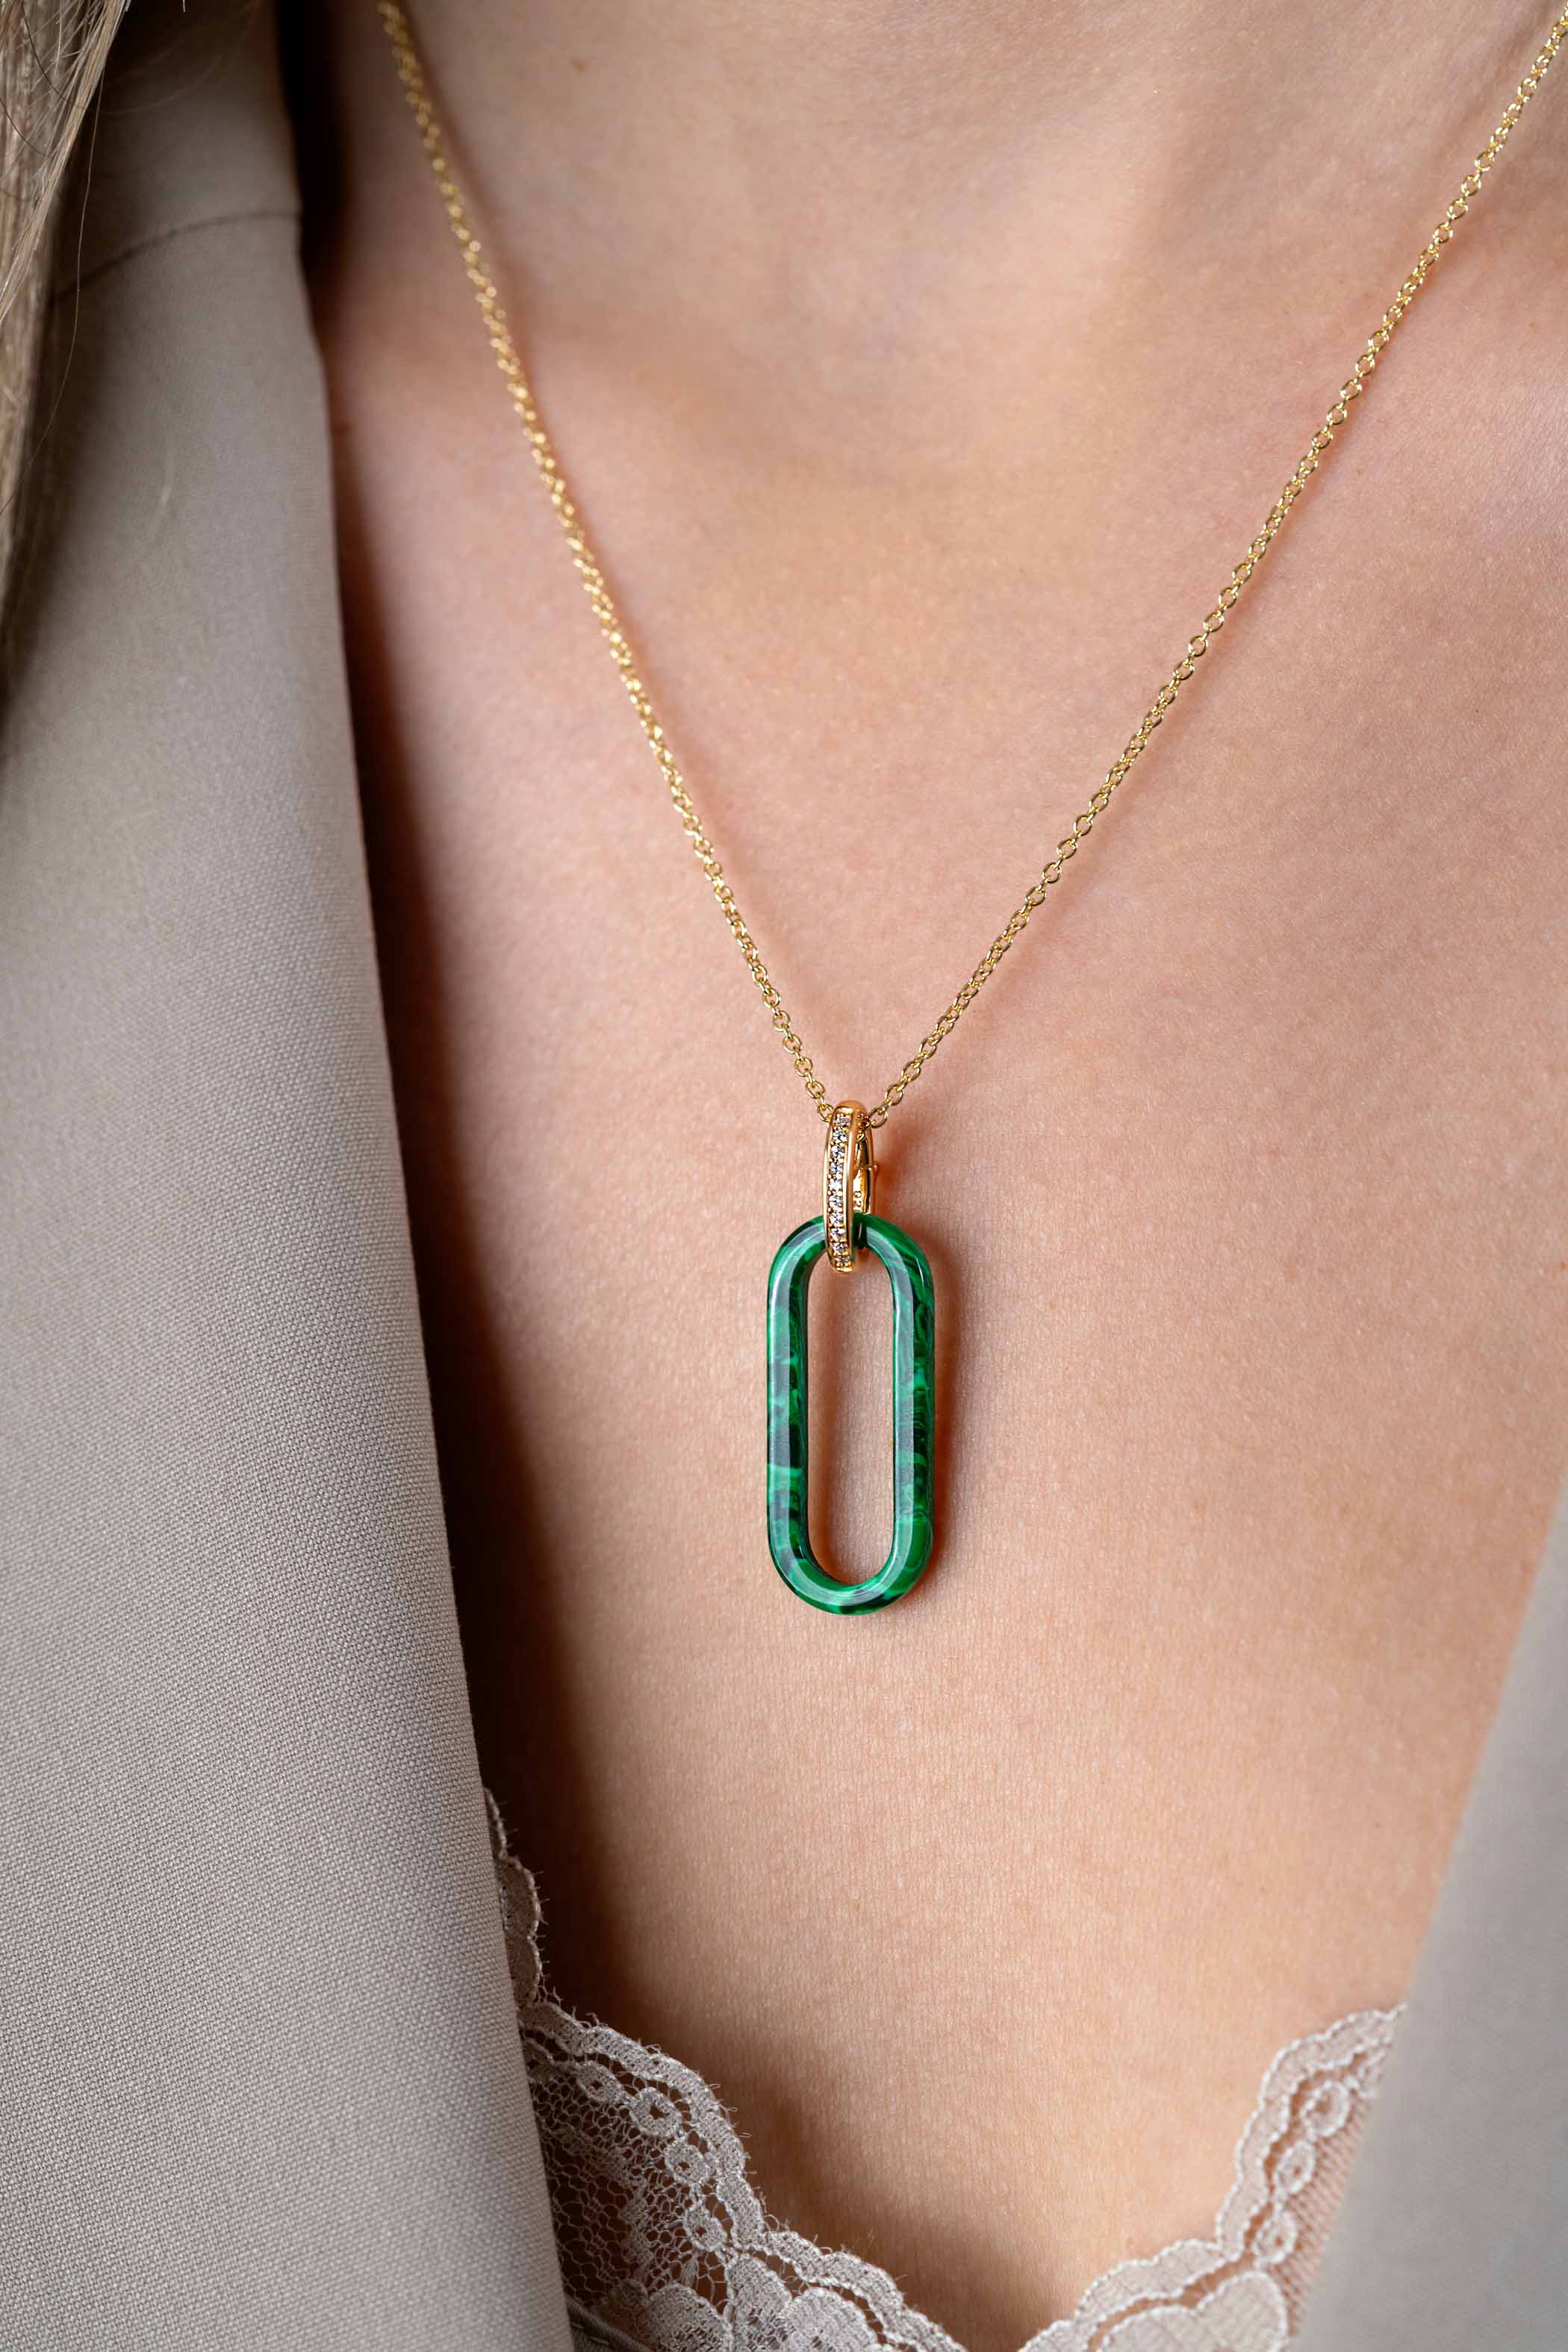 38mm ZINZI Oval Pendant Green Malachite and Luxurious Gold Plated Bail White Zirconias ZIH2456G (excl. necklace)